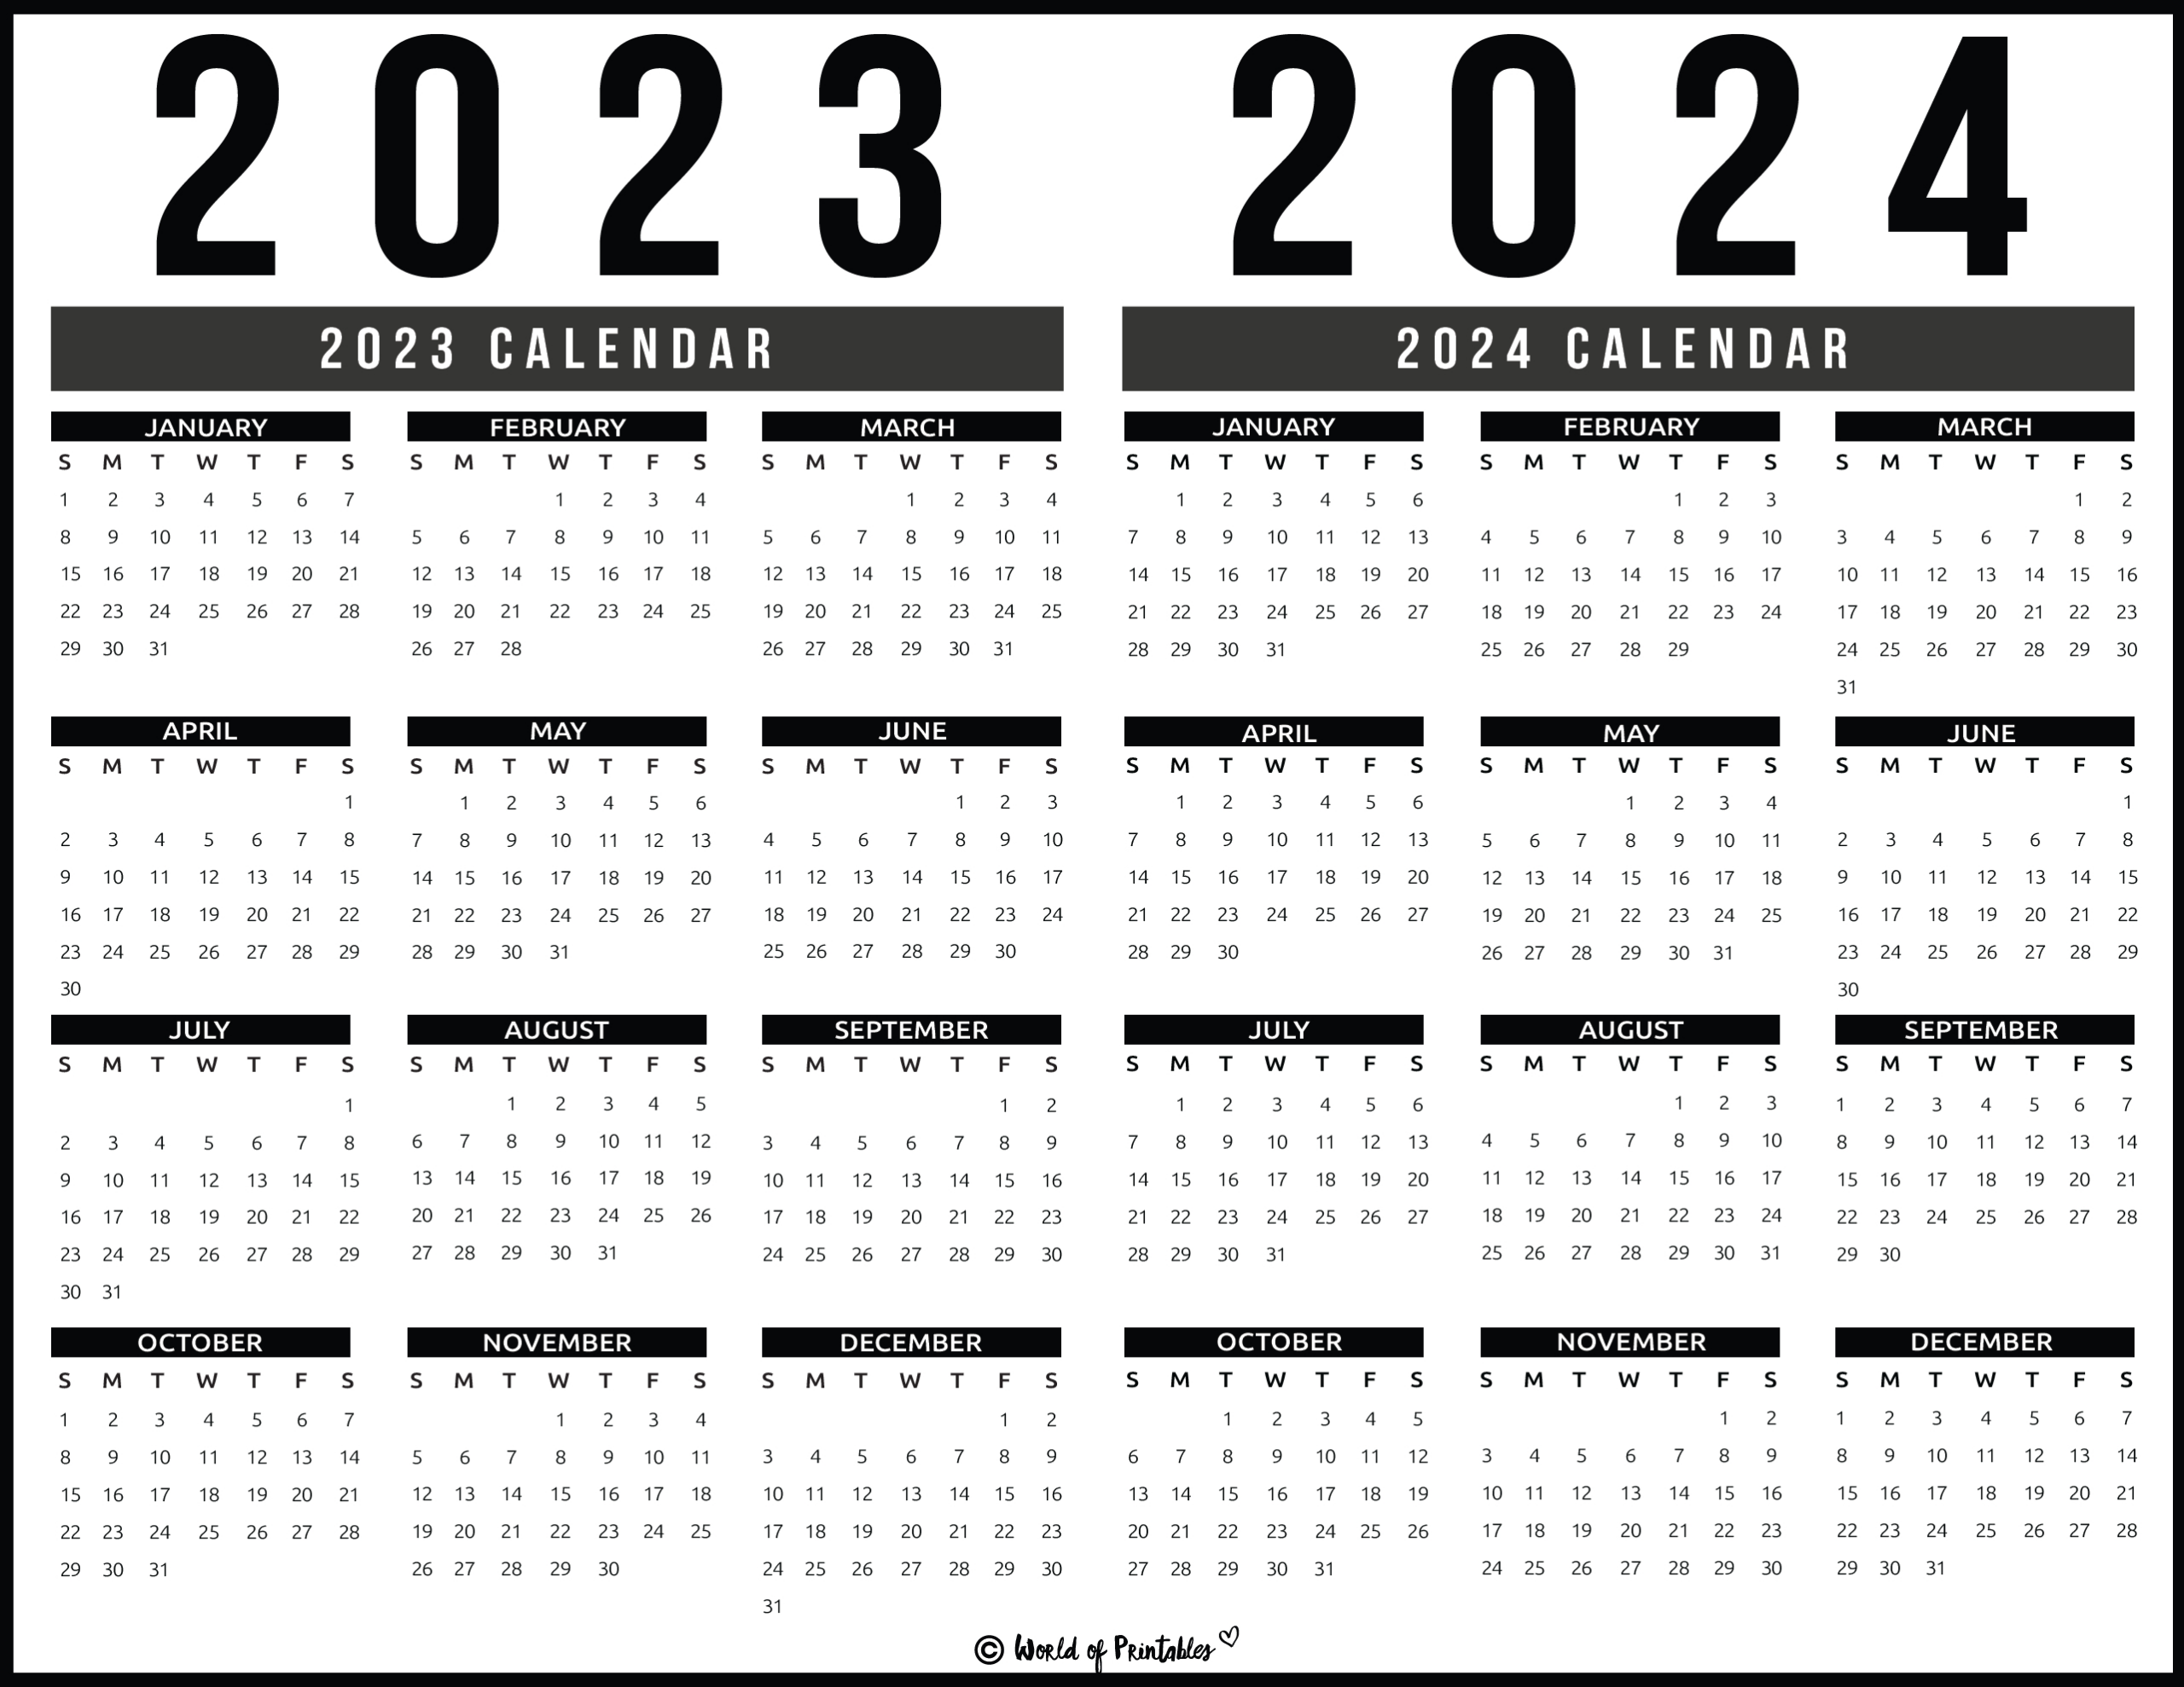 2023 2024 Calendar Free Printables - World Of Printables | Yearly Calendar 2023 And 2024